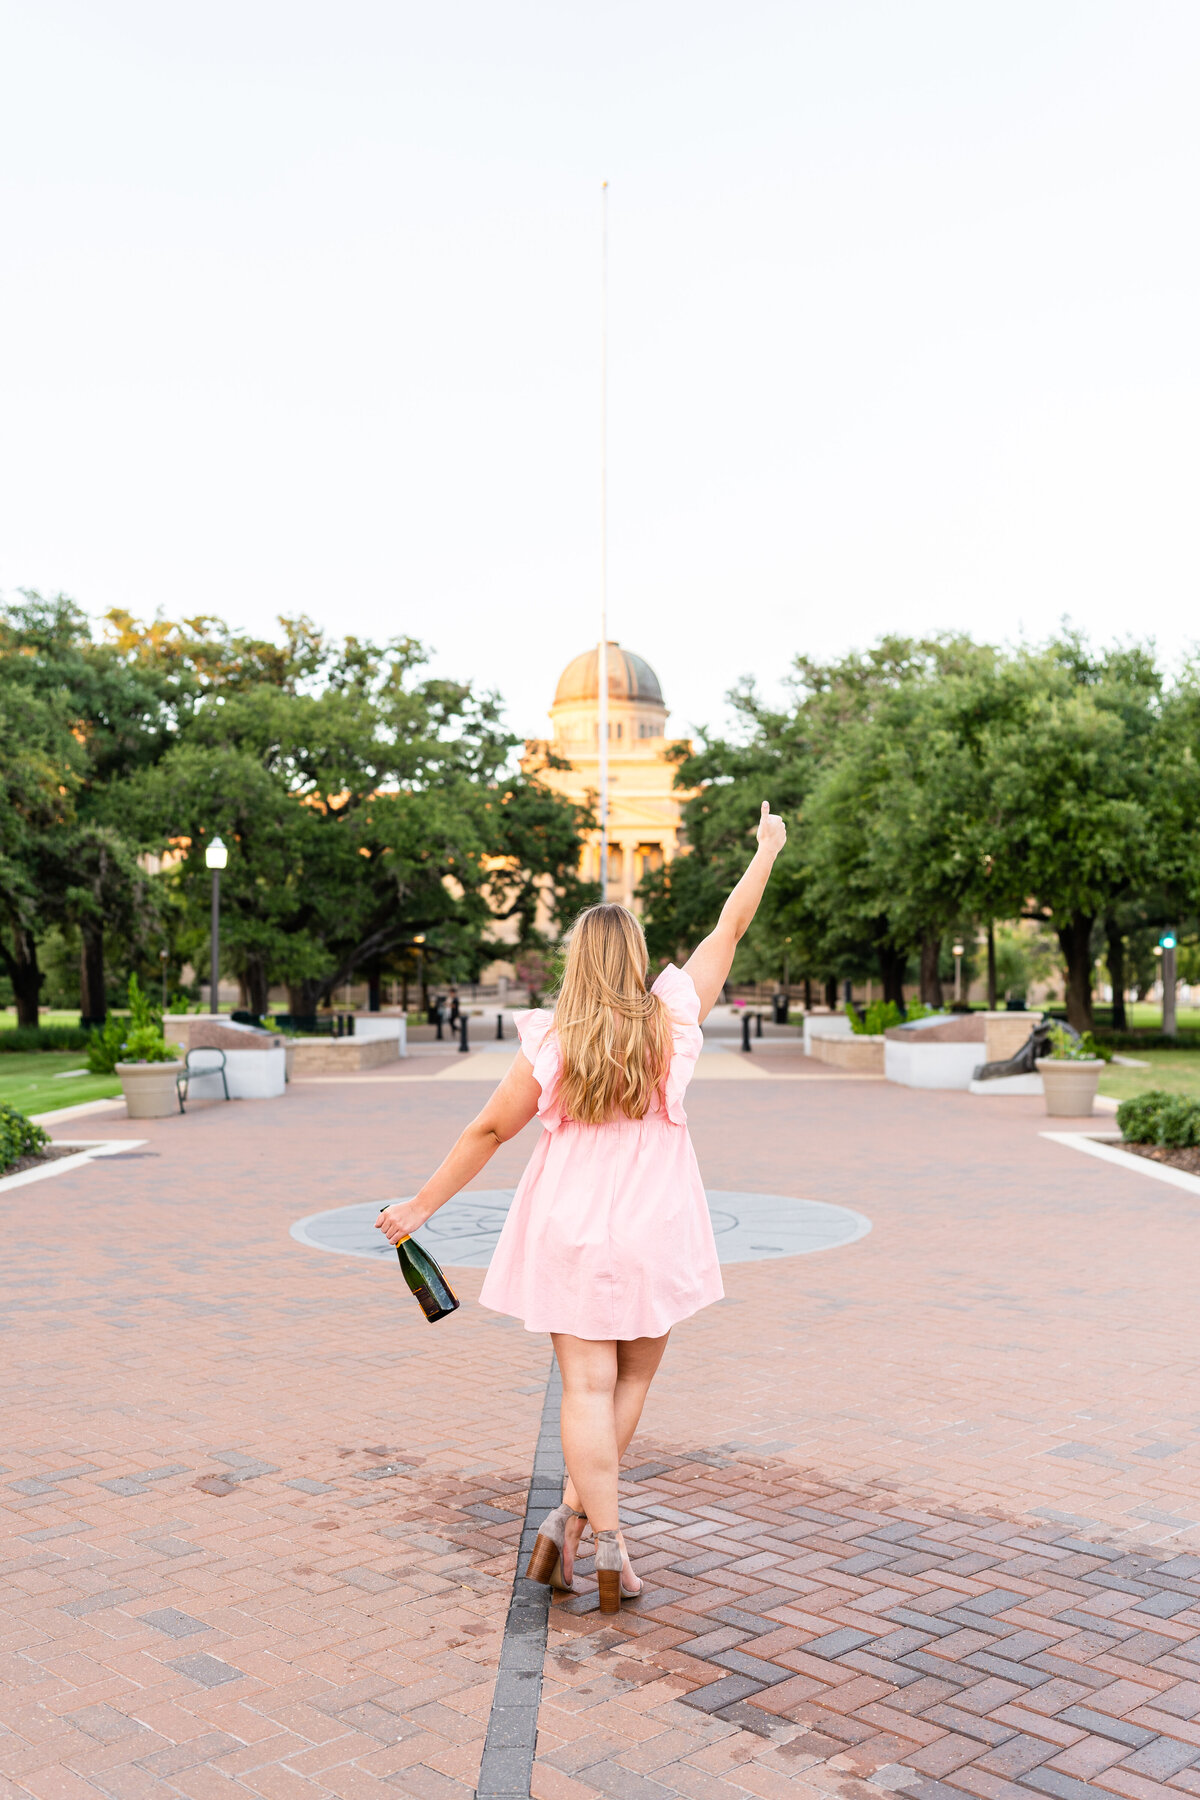 Texas A&M senior girl turned away and holding thumps up while other holds champagne bottle while wearing pink dress at Academic Building in the background